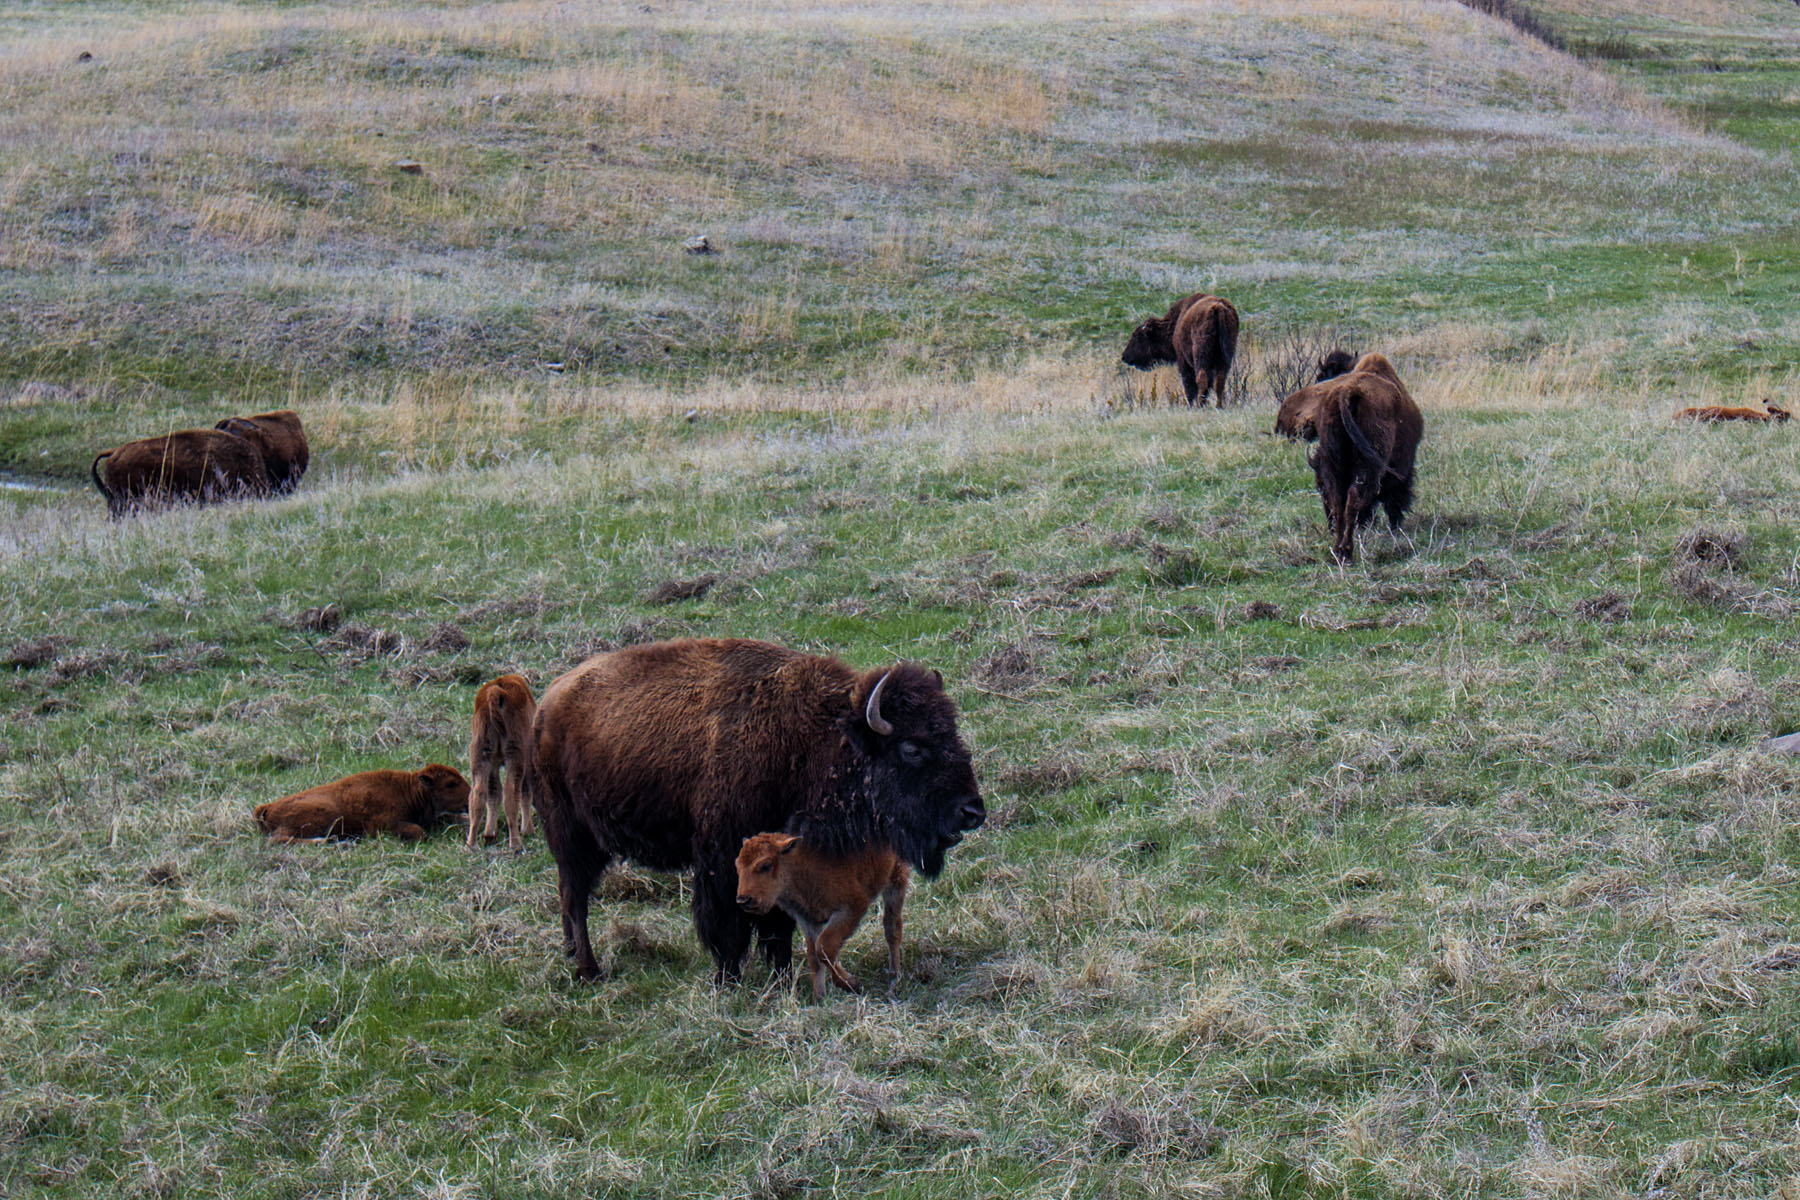 Bison calf finding shelter, Custer State Park.  Click for next photo.